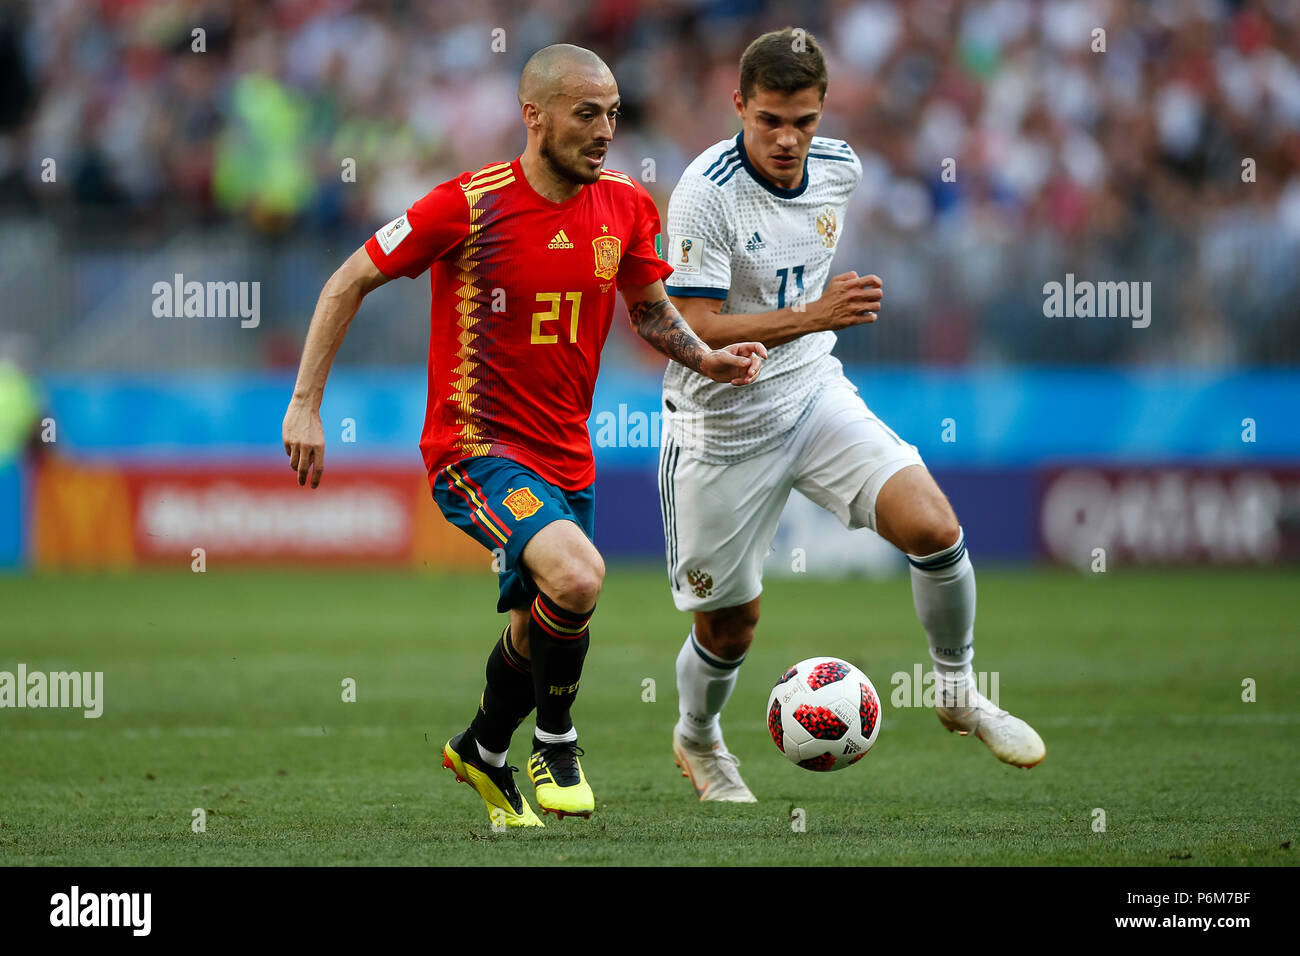 Moscow, Russia. 1st July, 2018. Moscow, Russia. 1st Jul, 2018. David Silva of Spain and Roman Zobnin of Russia during the 2018 FIFA World Cup Round of 16 match between Spain and Russia at Luzhniki Stadium on July 1st 2018 in Moscow, Russia.  Credit: PHC Images/Alamy Live News Credit: PHC Images/Alamy Live News Stock Photo